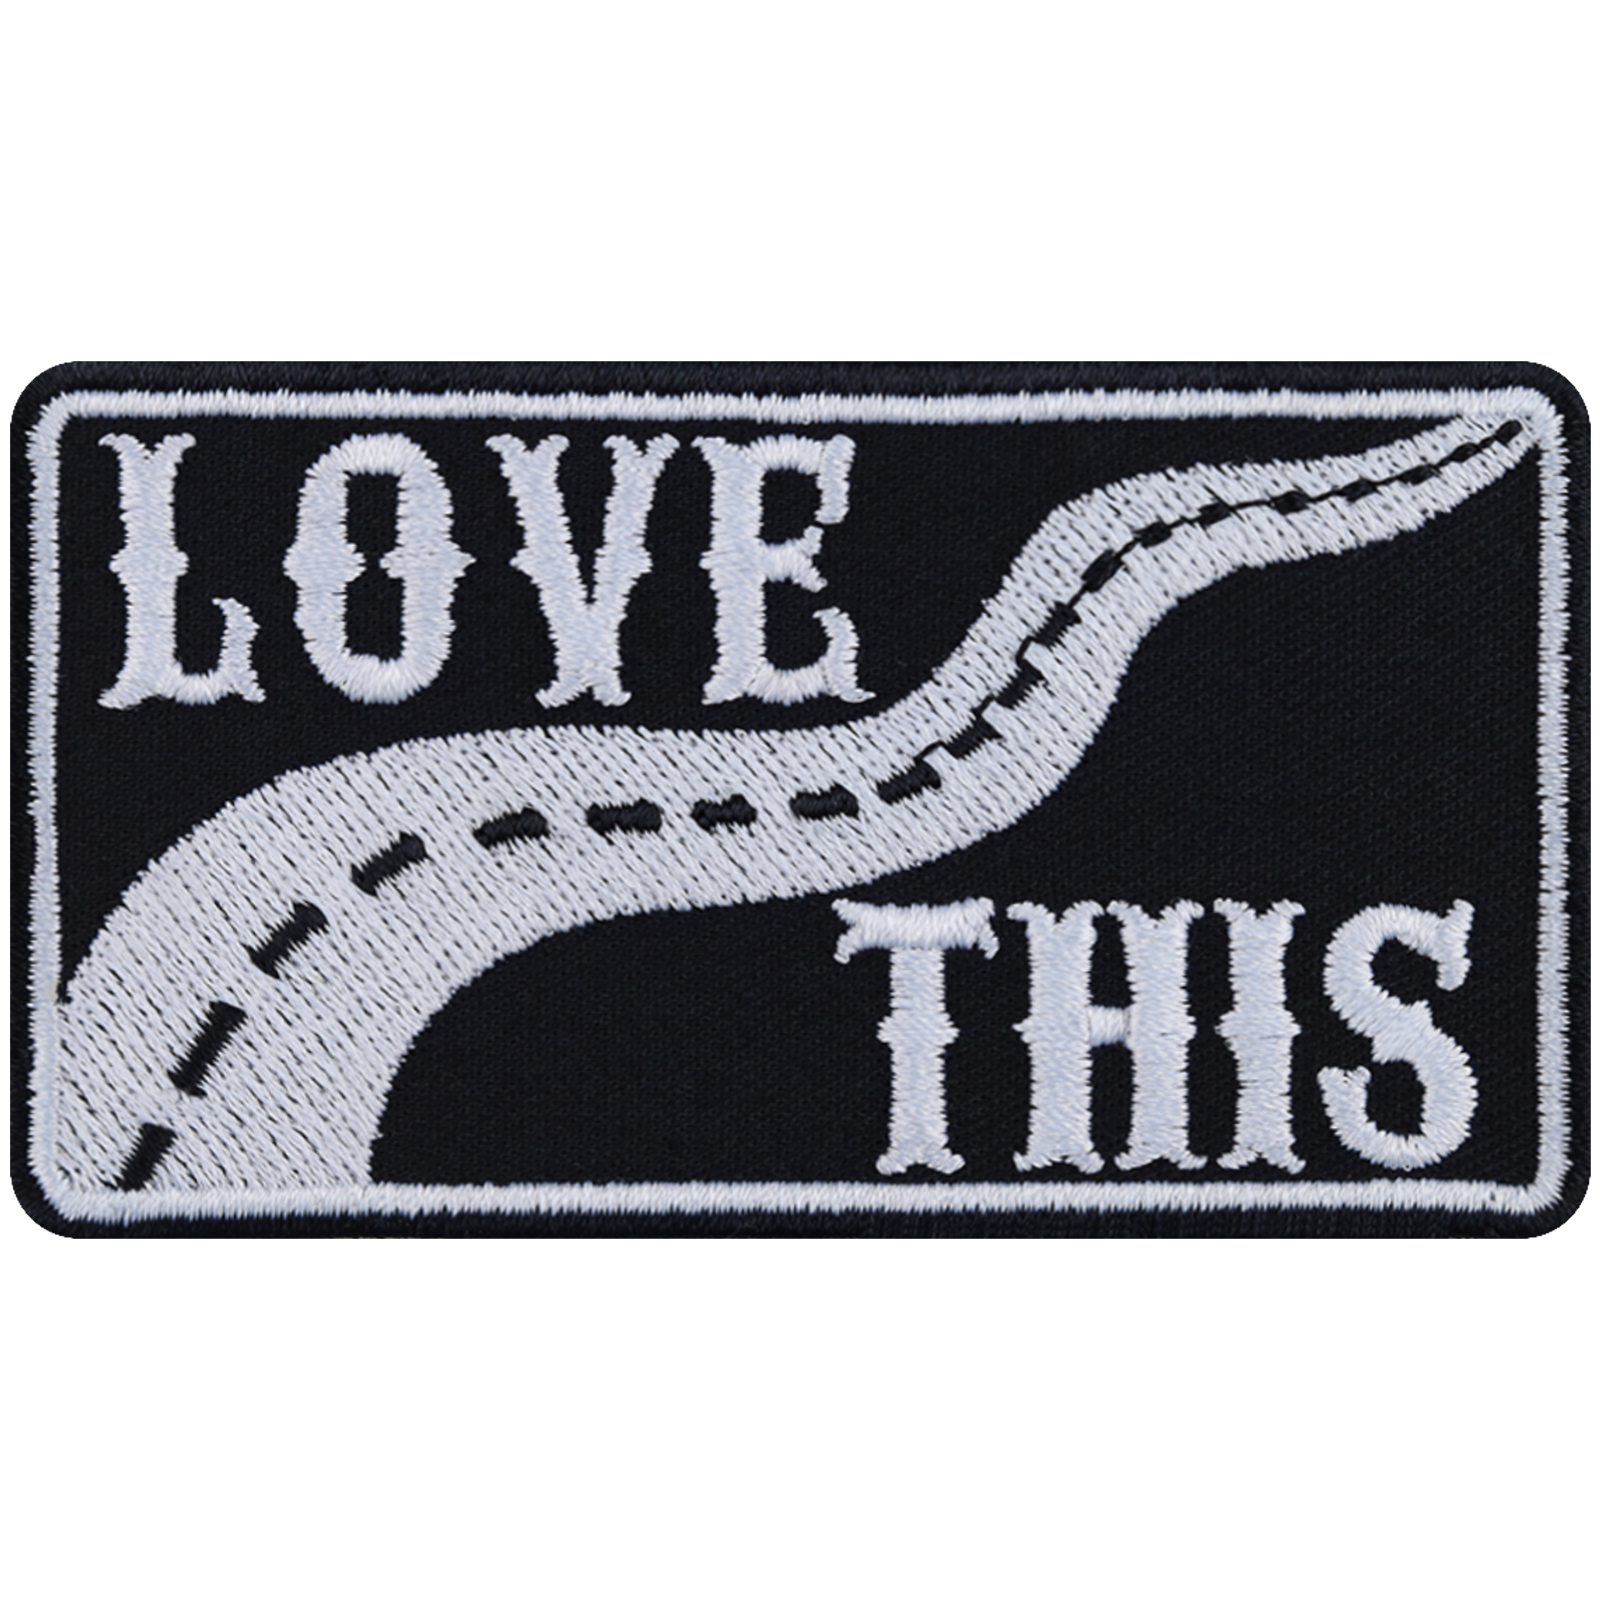 Love this road - Patch